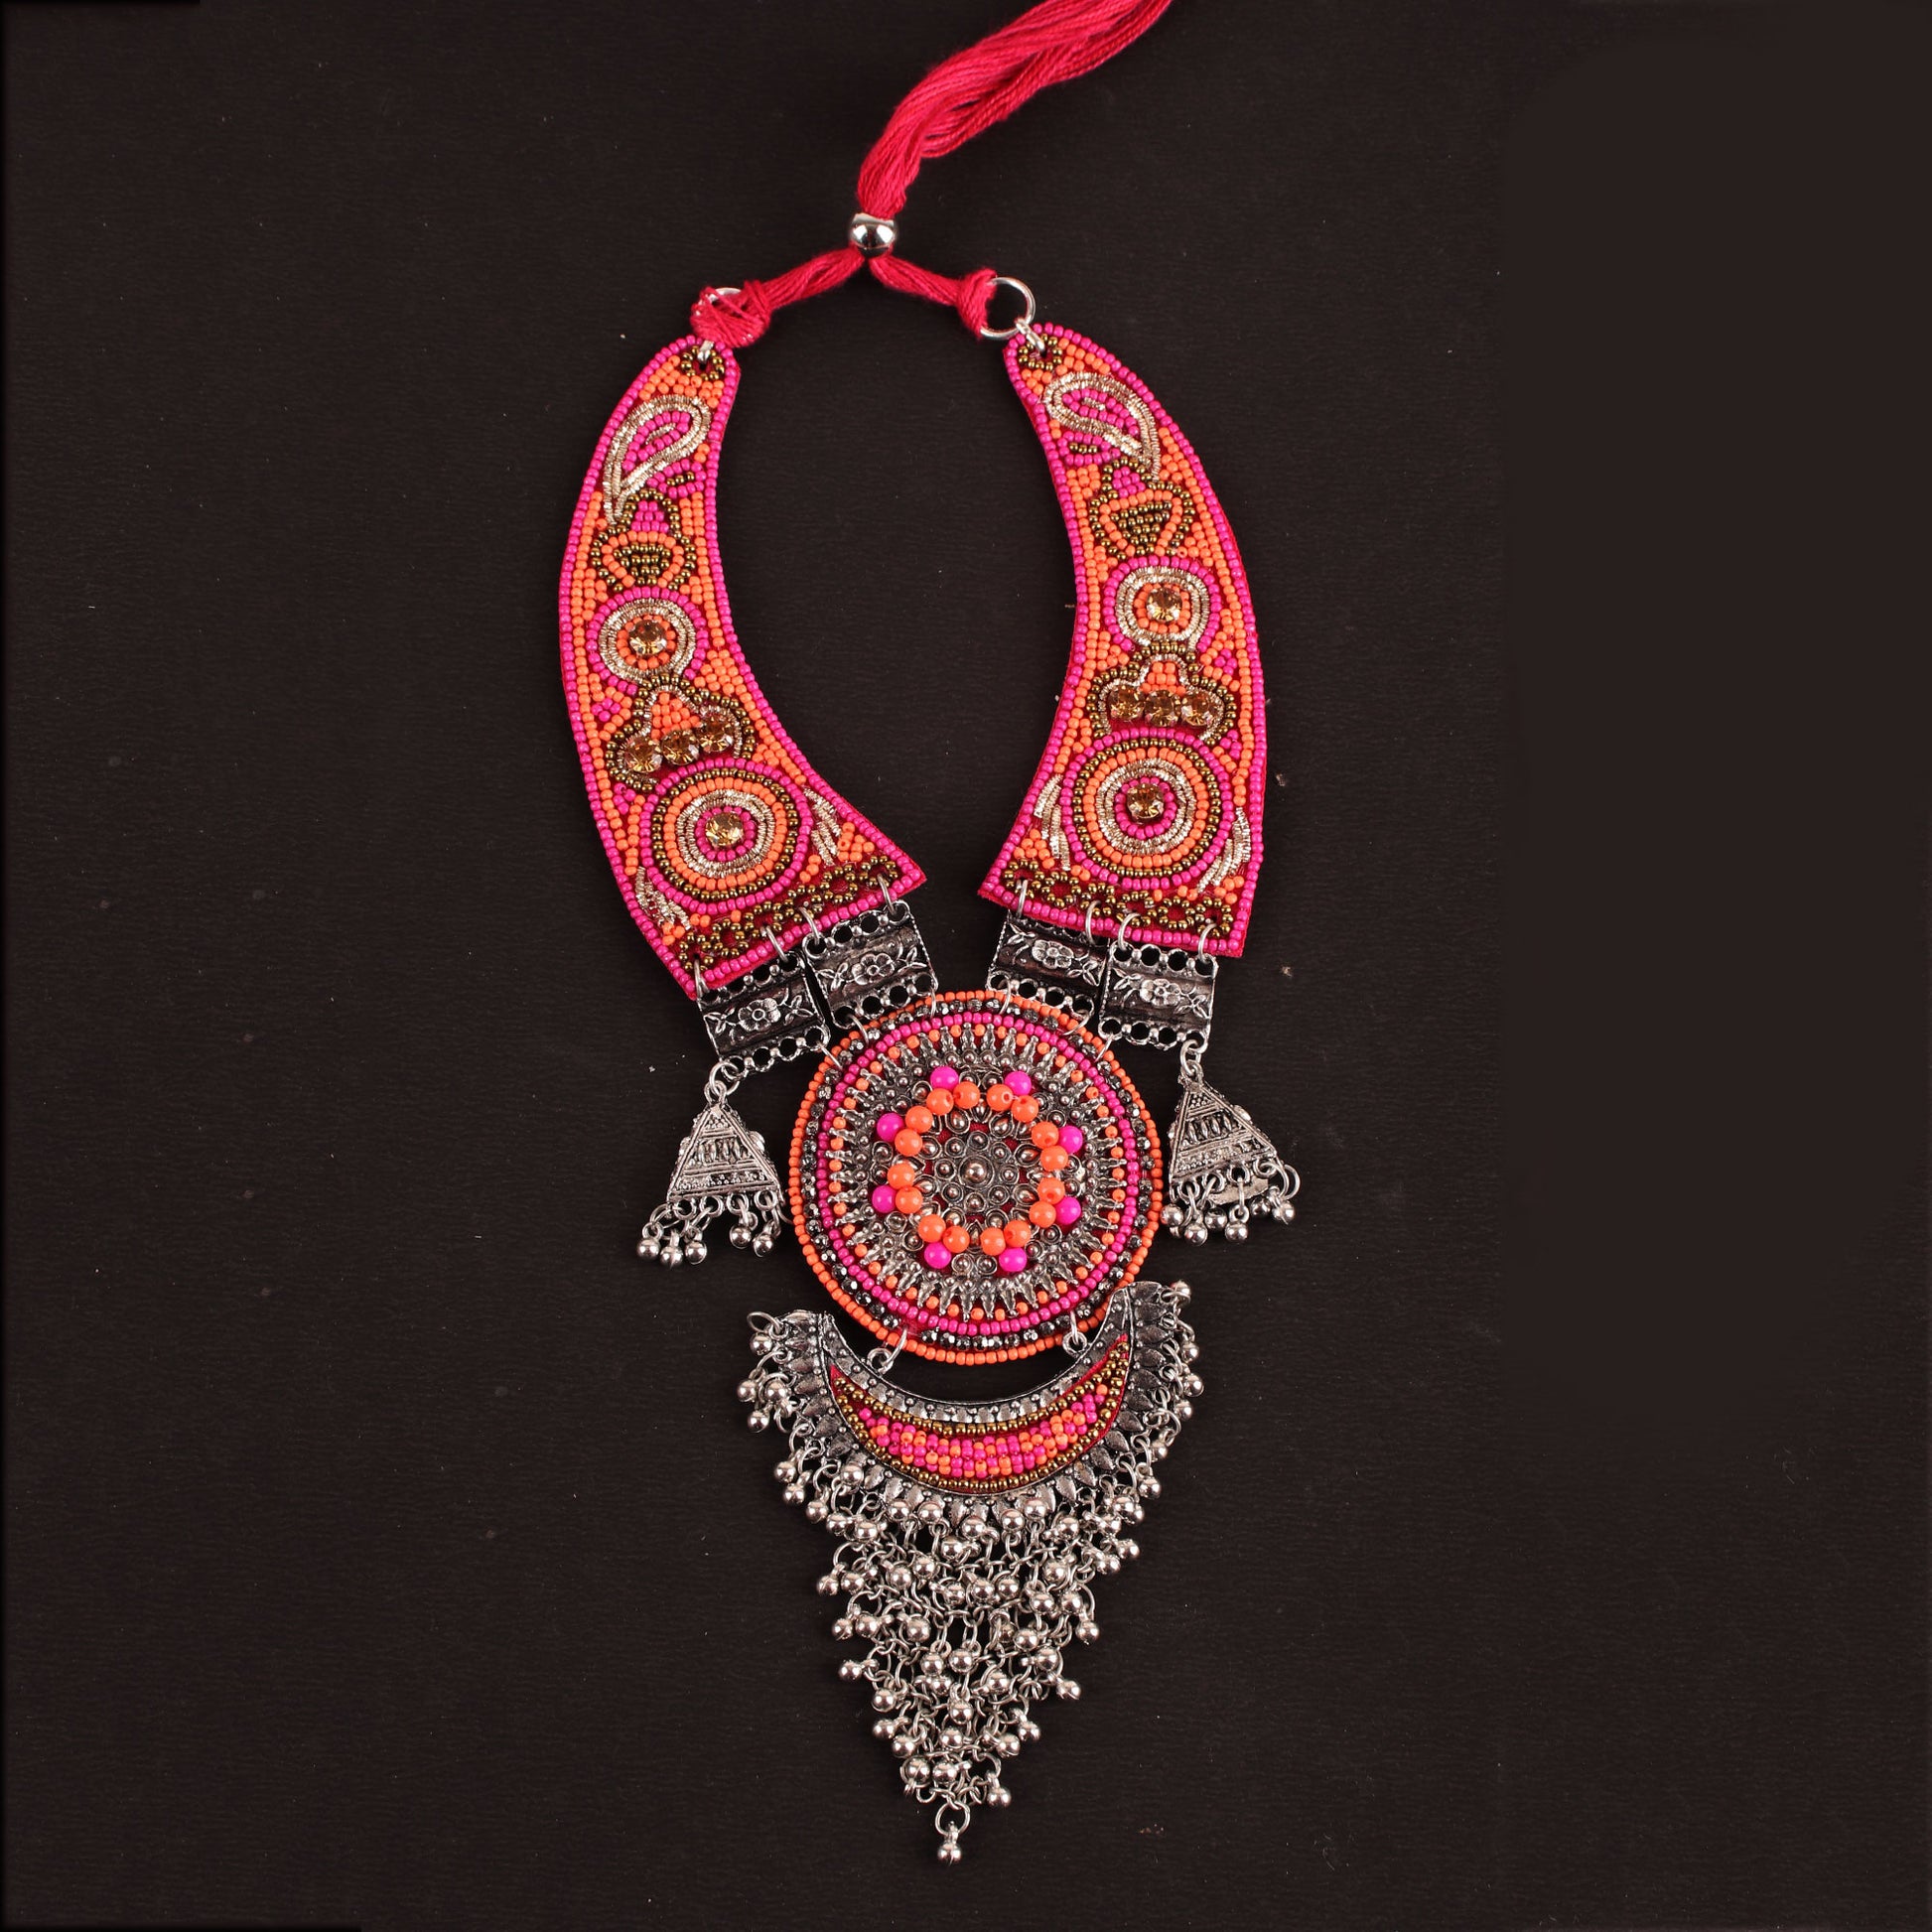 Necklace,The Picasso Art Necklace in Pink & Orange - Cippele Multi Store